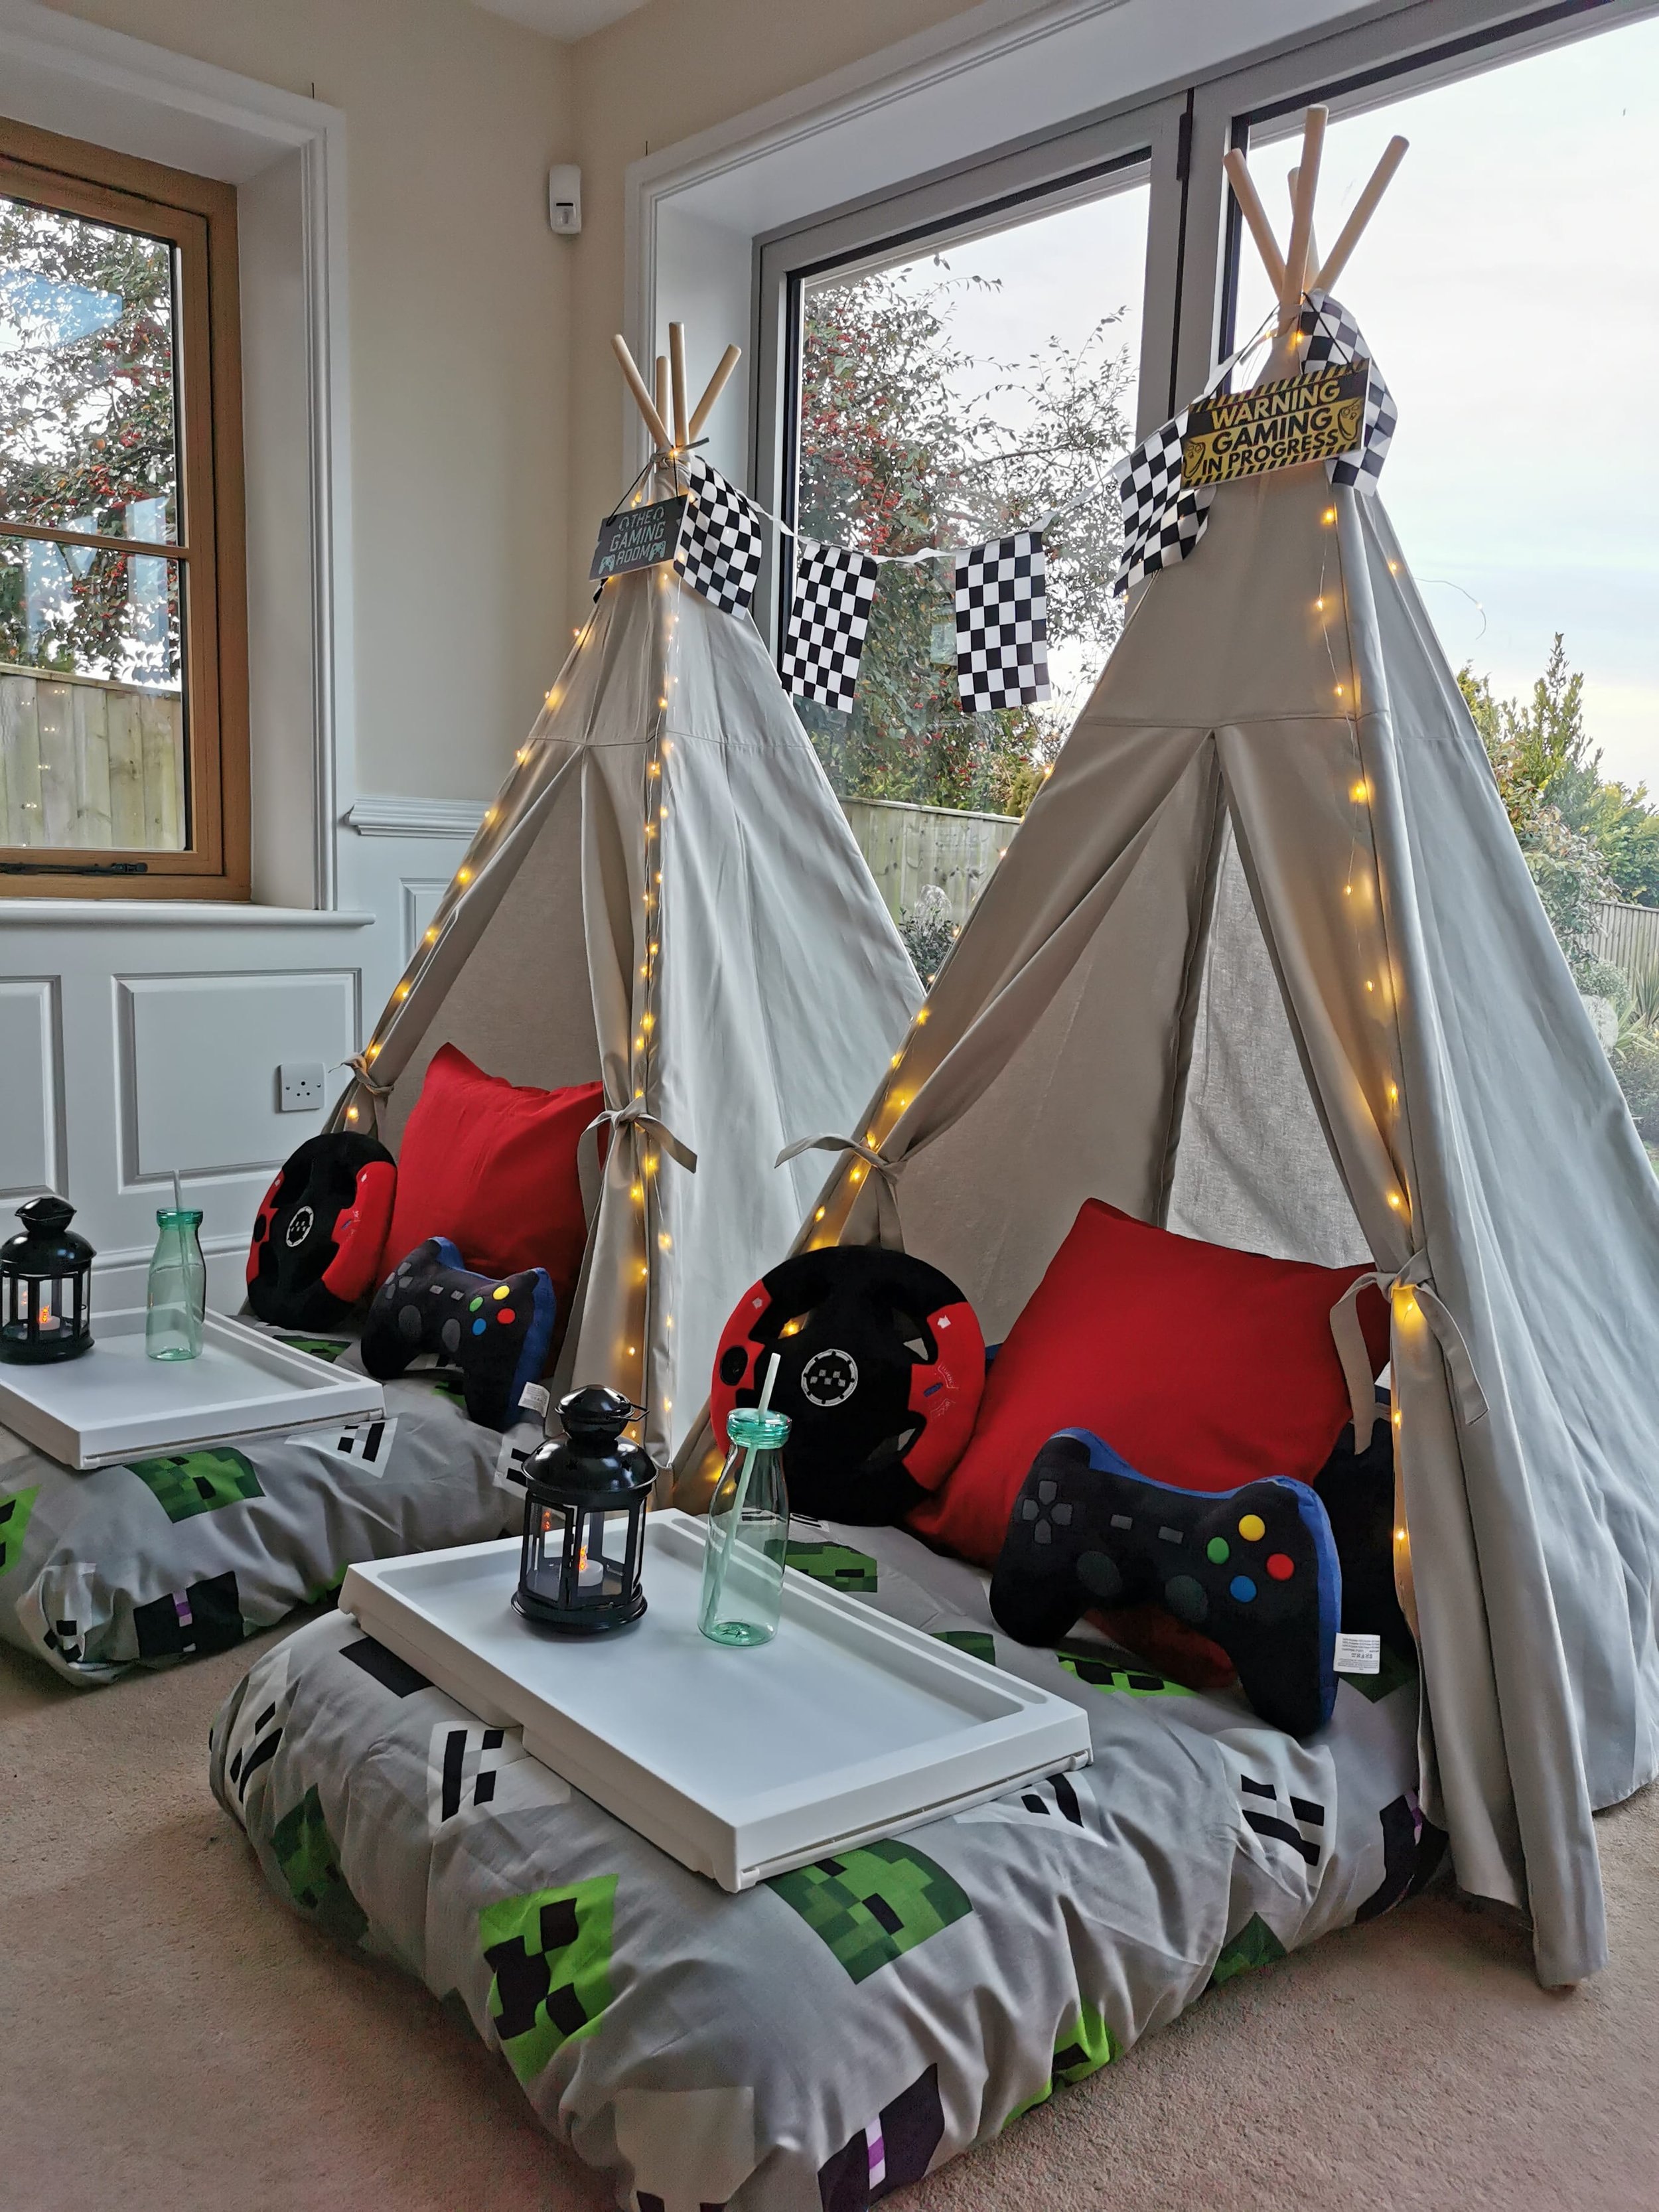 Glampees- Sleepover Party Tents in Hampshire